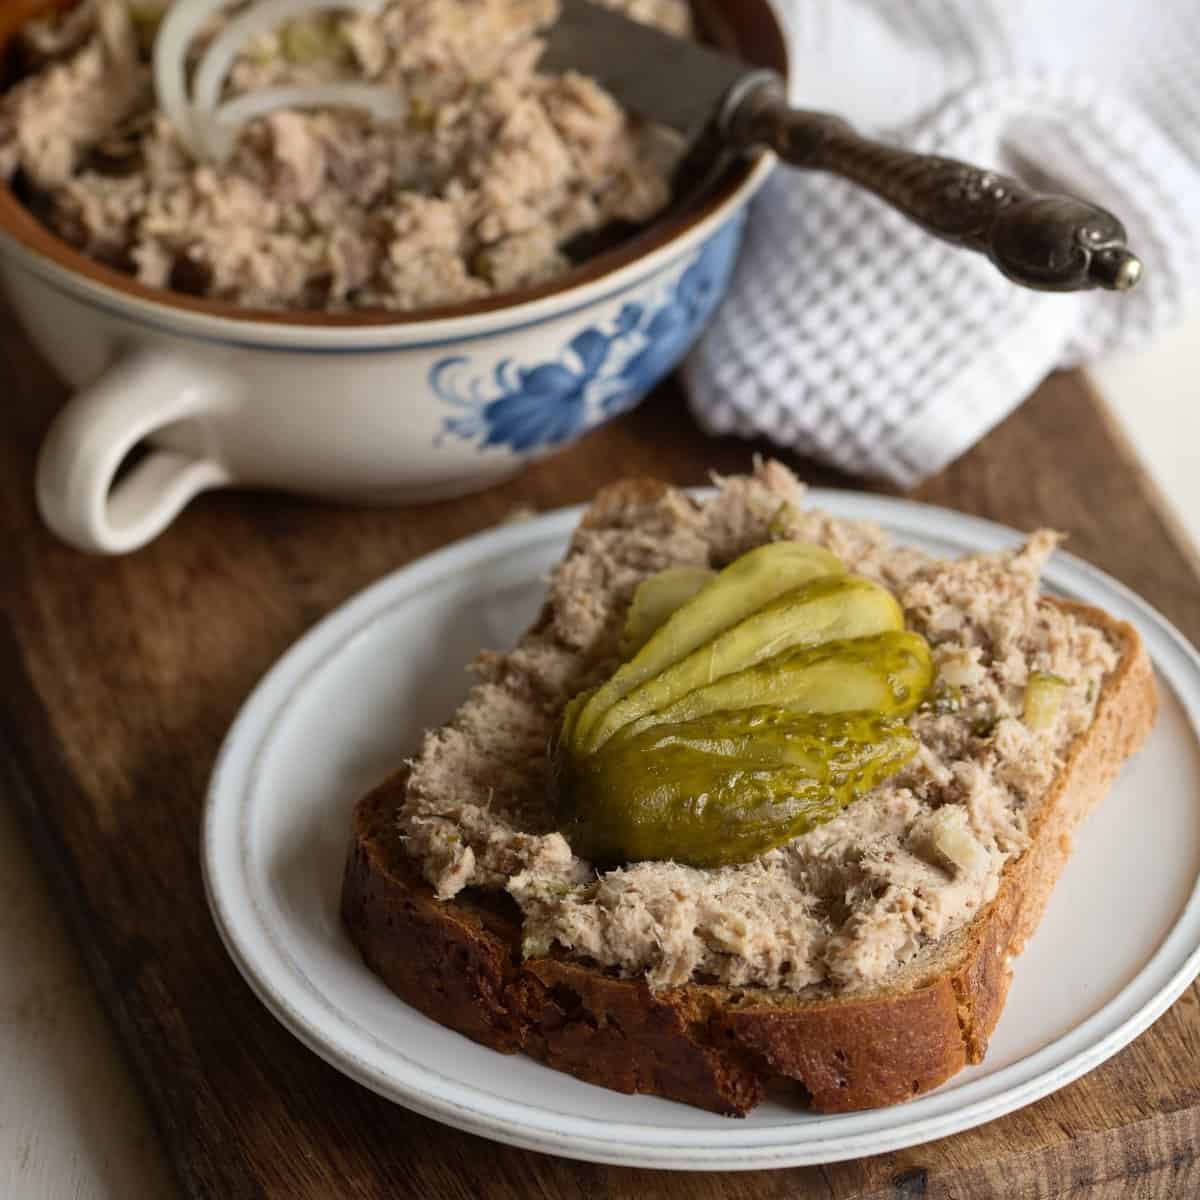 Leftover pork roast spread on a slice of rye bread, served on a small plate. Garnished with a gherkin.